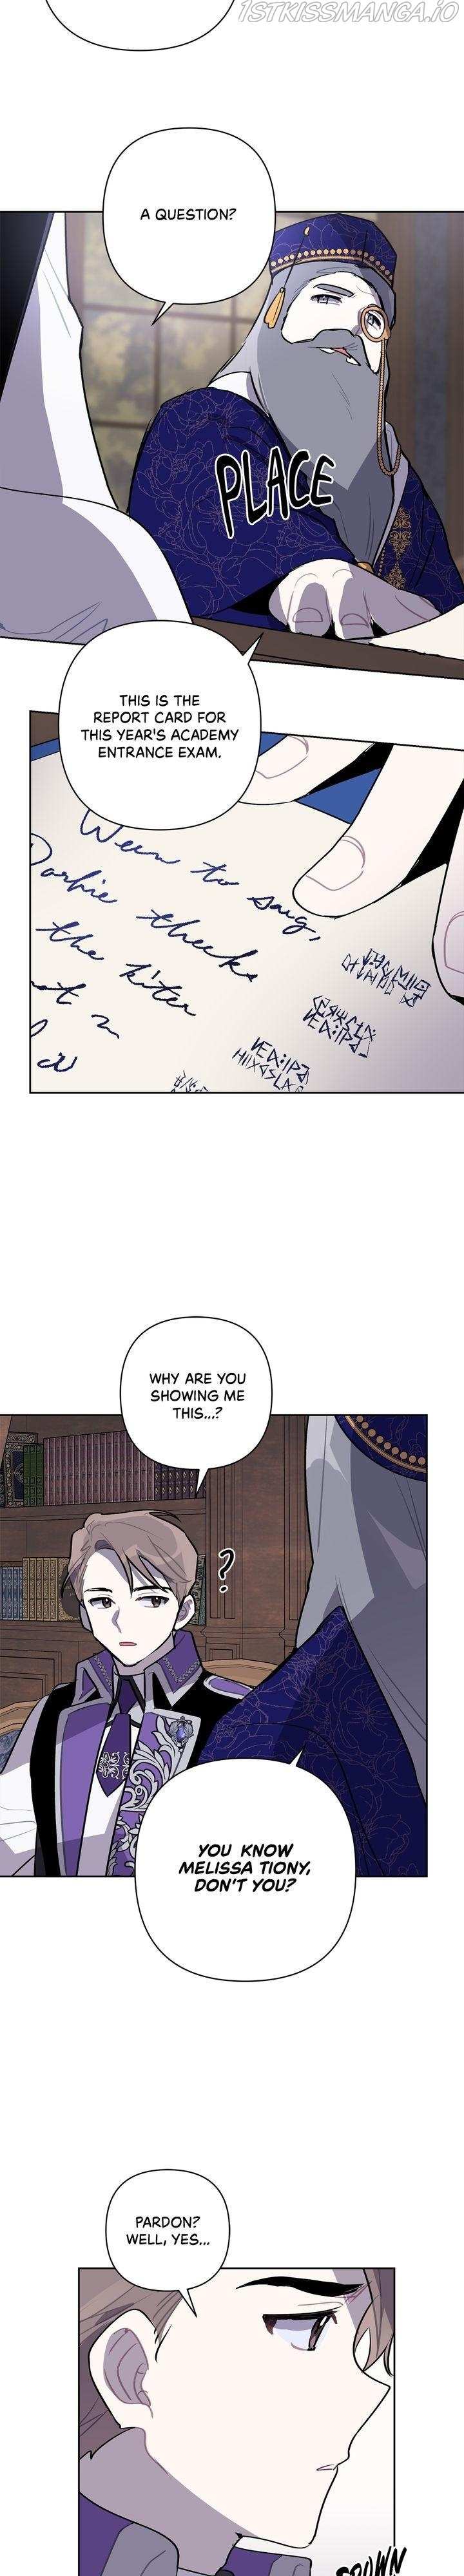 The Way the Mage Faces Death chapter 16 - page 28